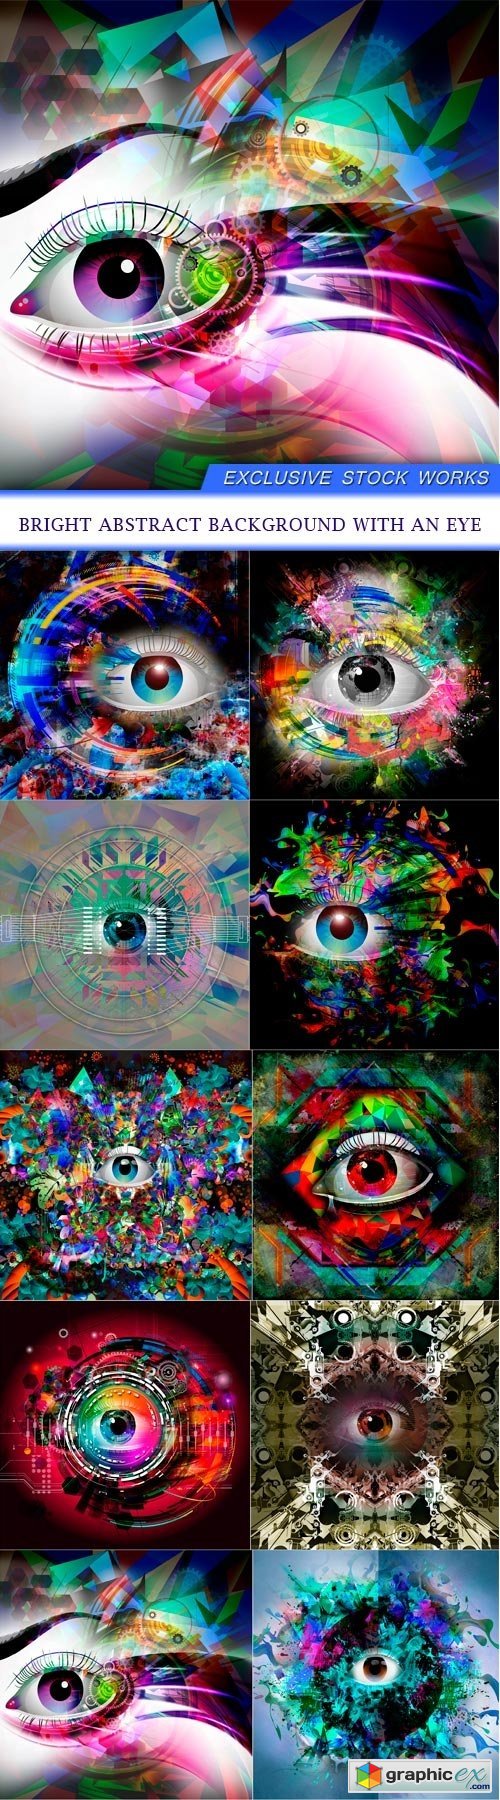 Bright abstract background with an eye 10X JPEG